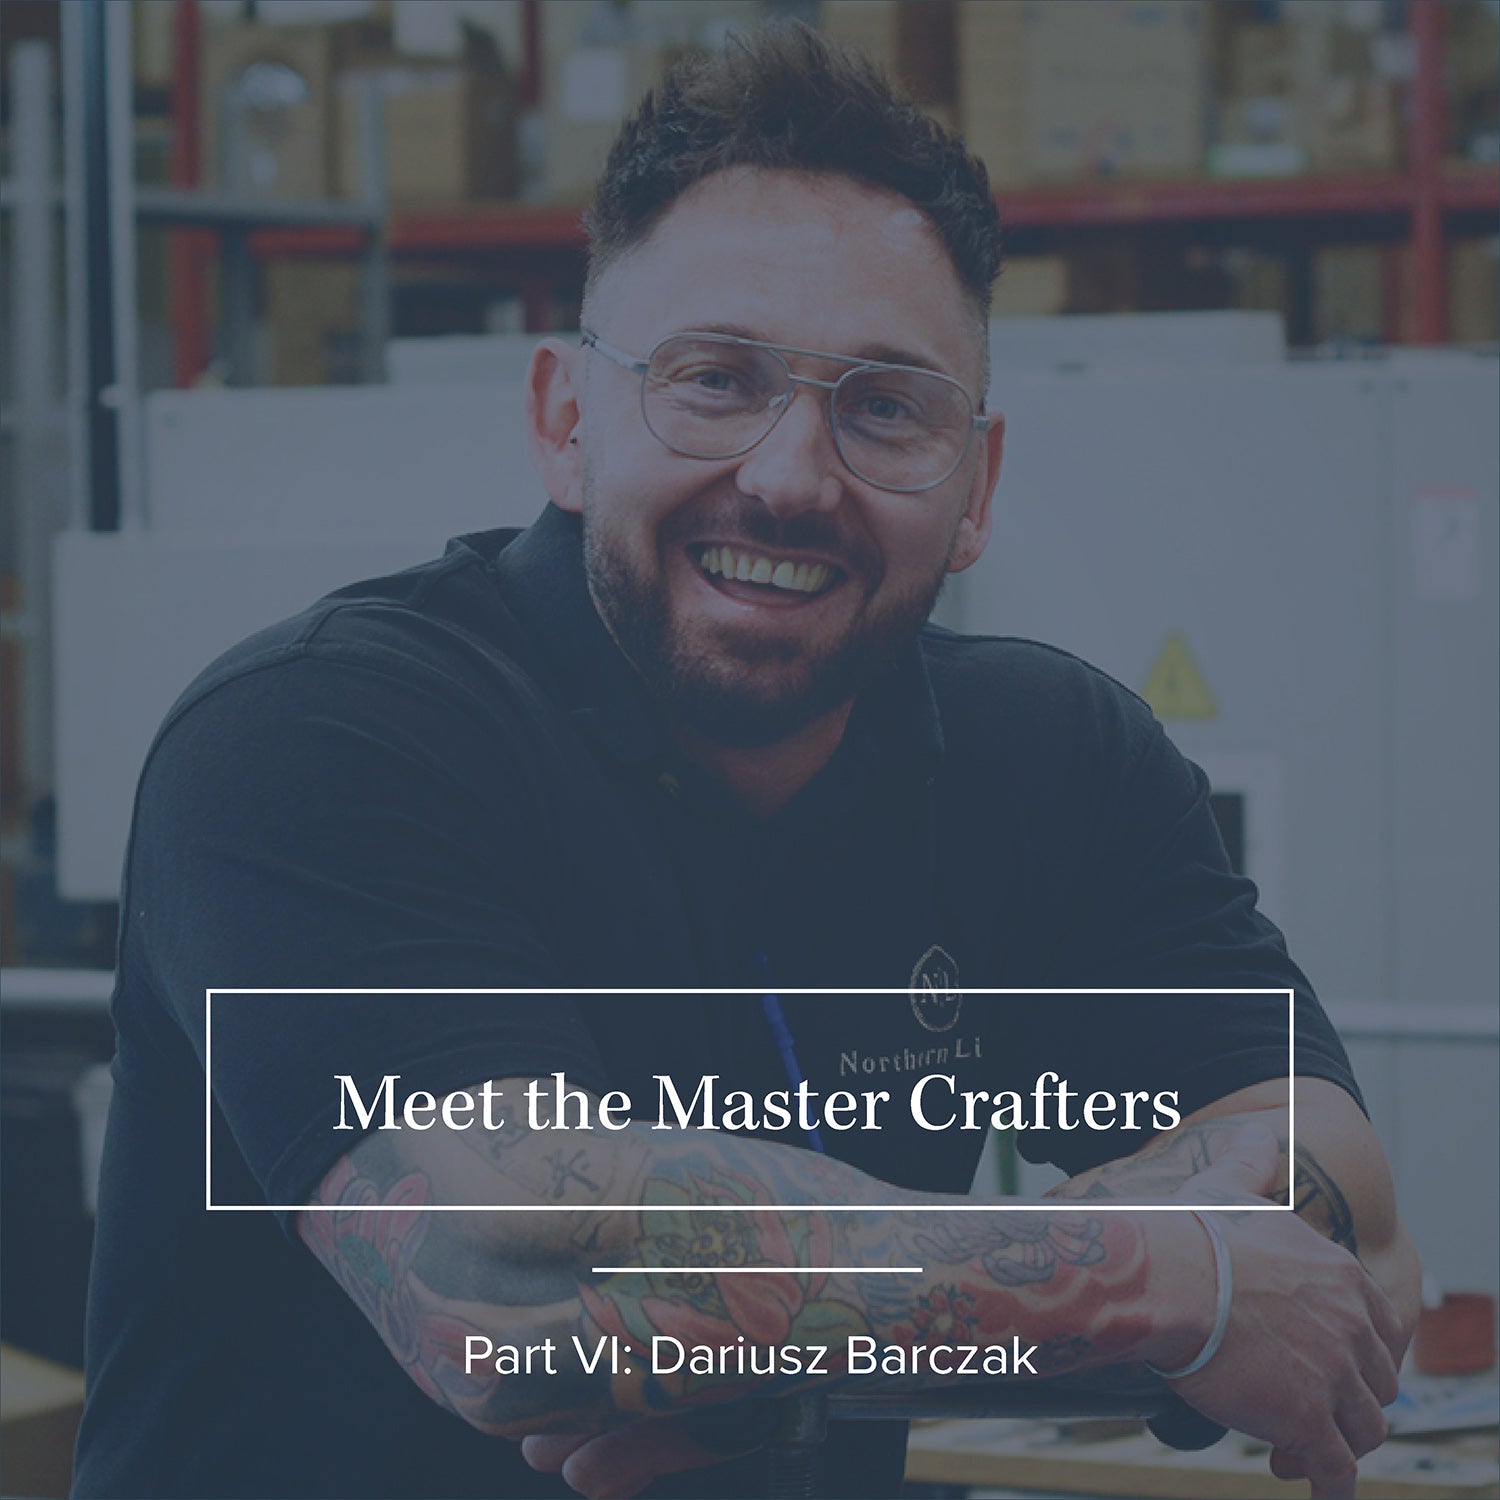 Meet the Master Crafters: Part VI